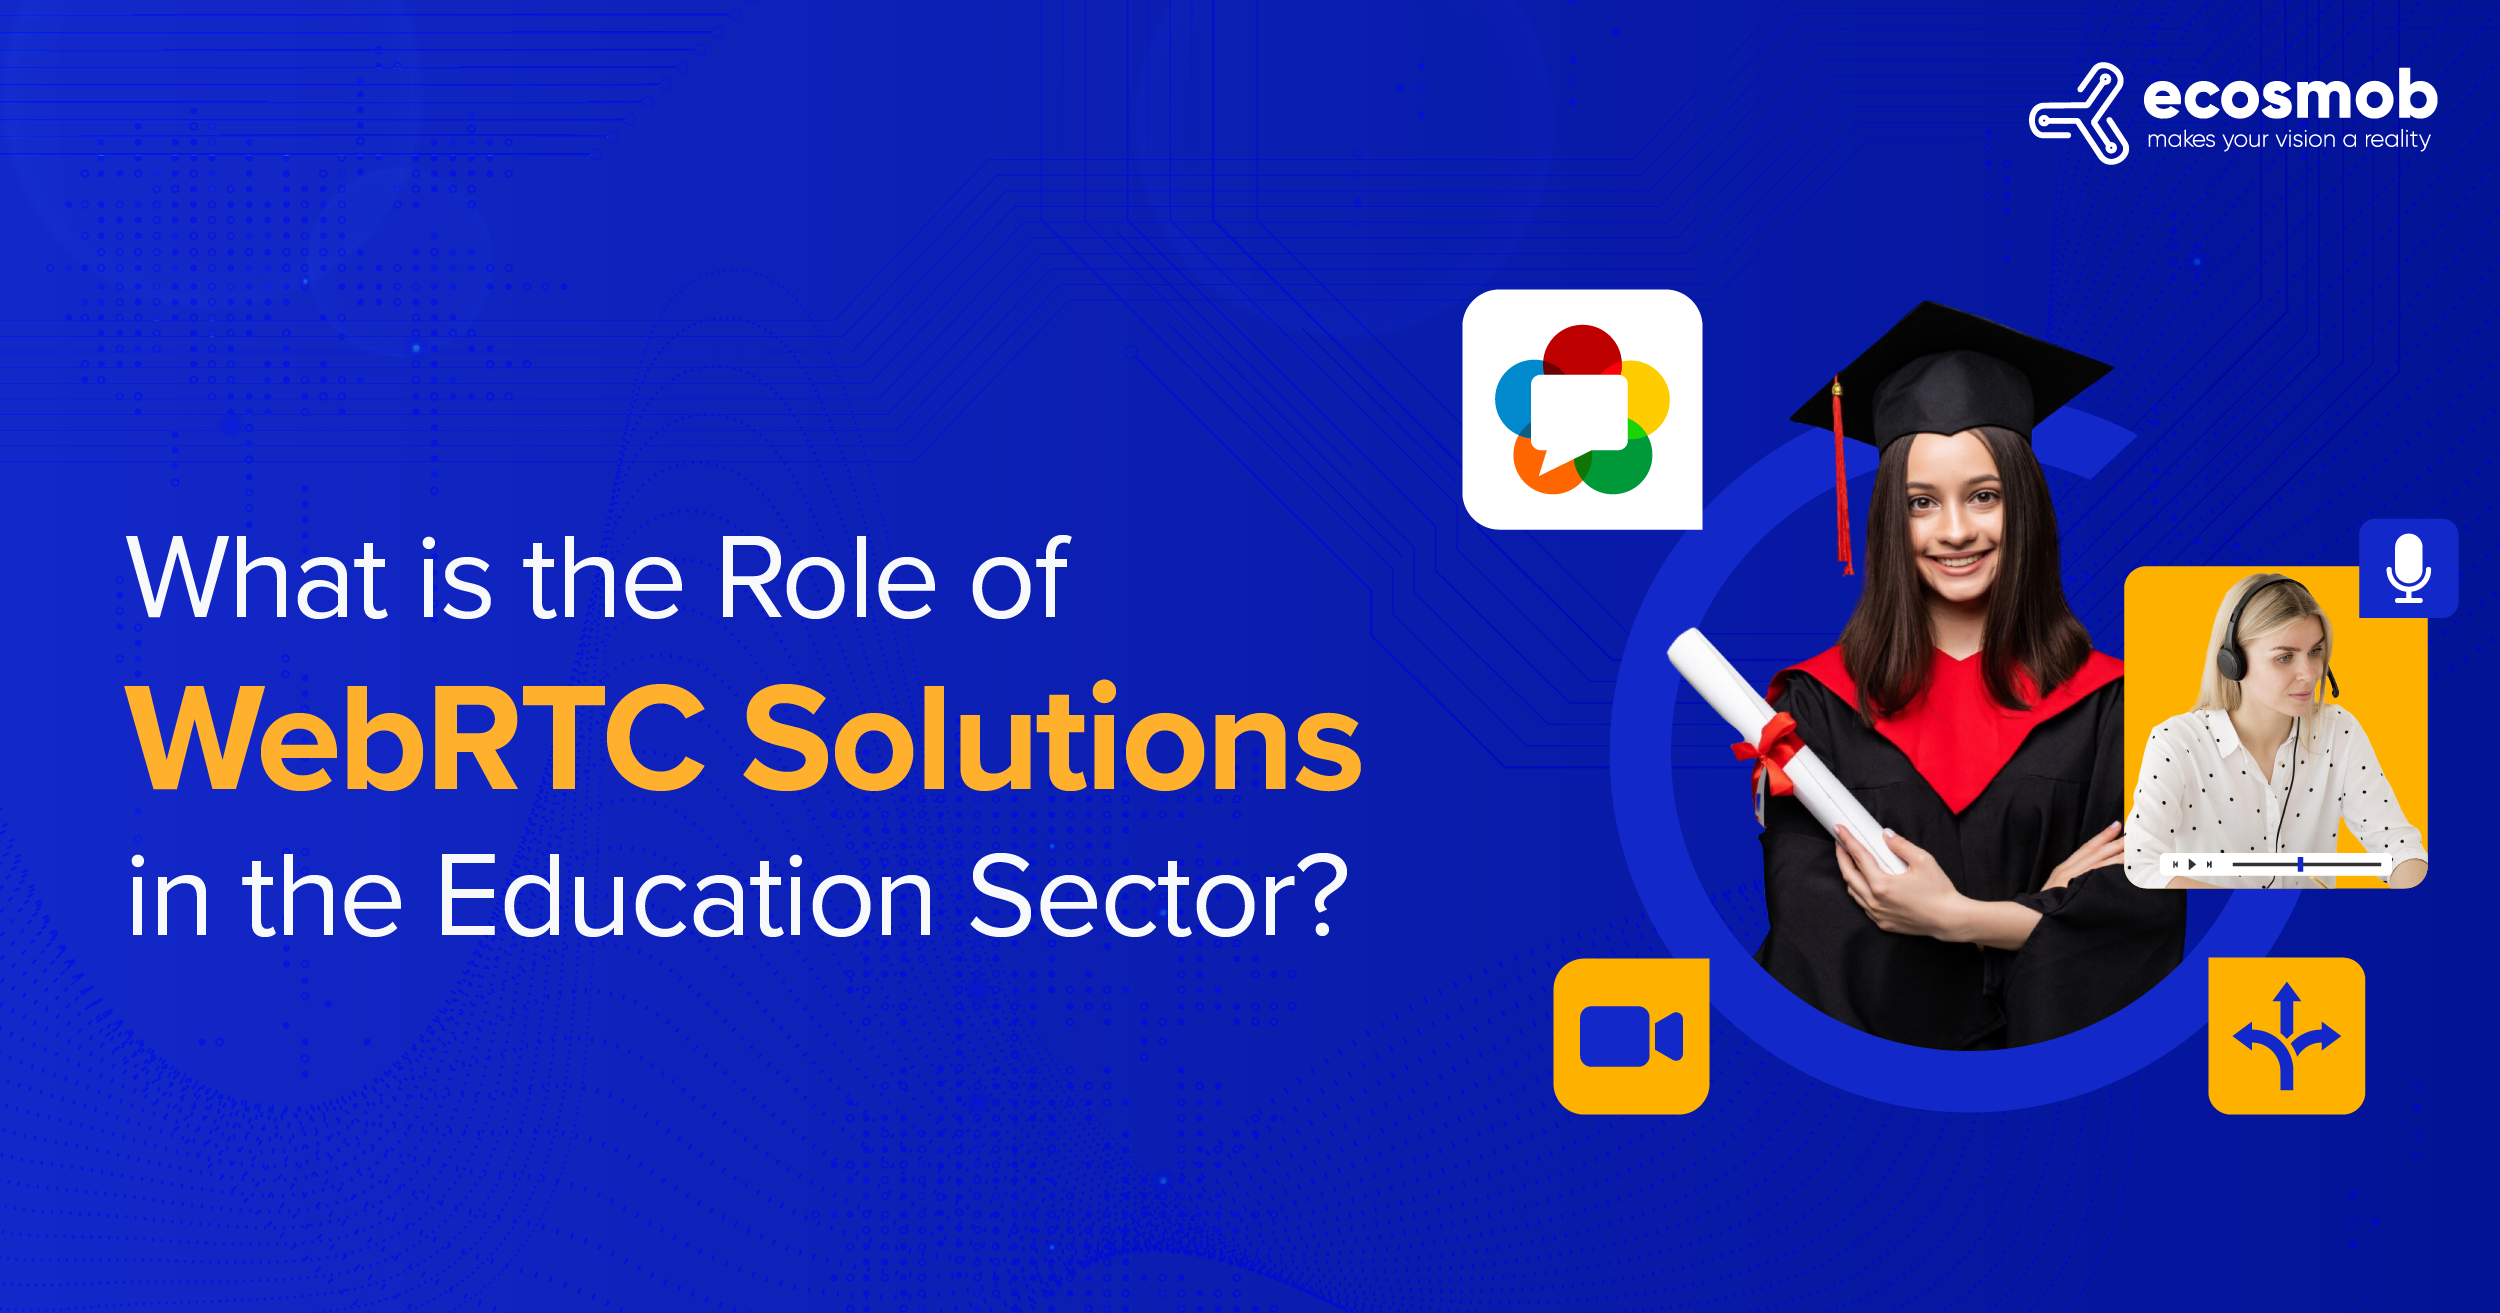 Role of WebRTC Solutions in Education the Sector